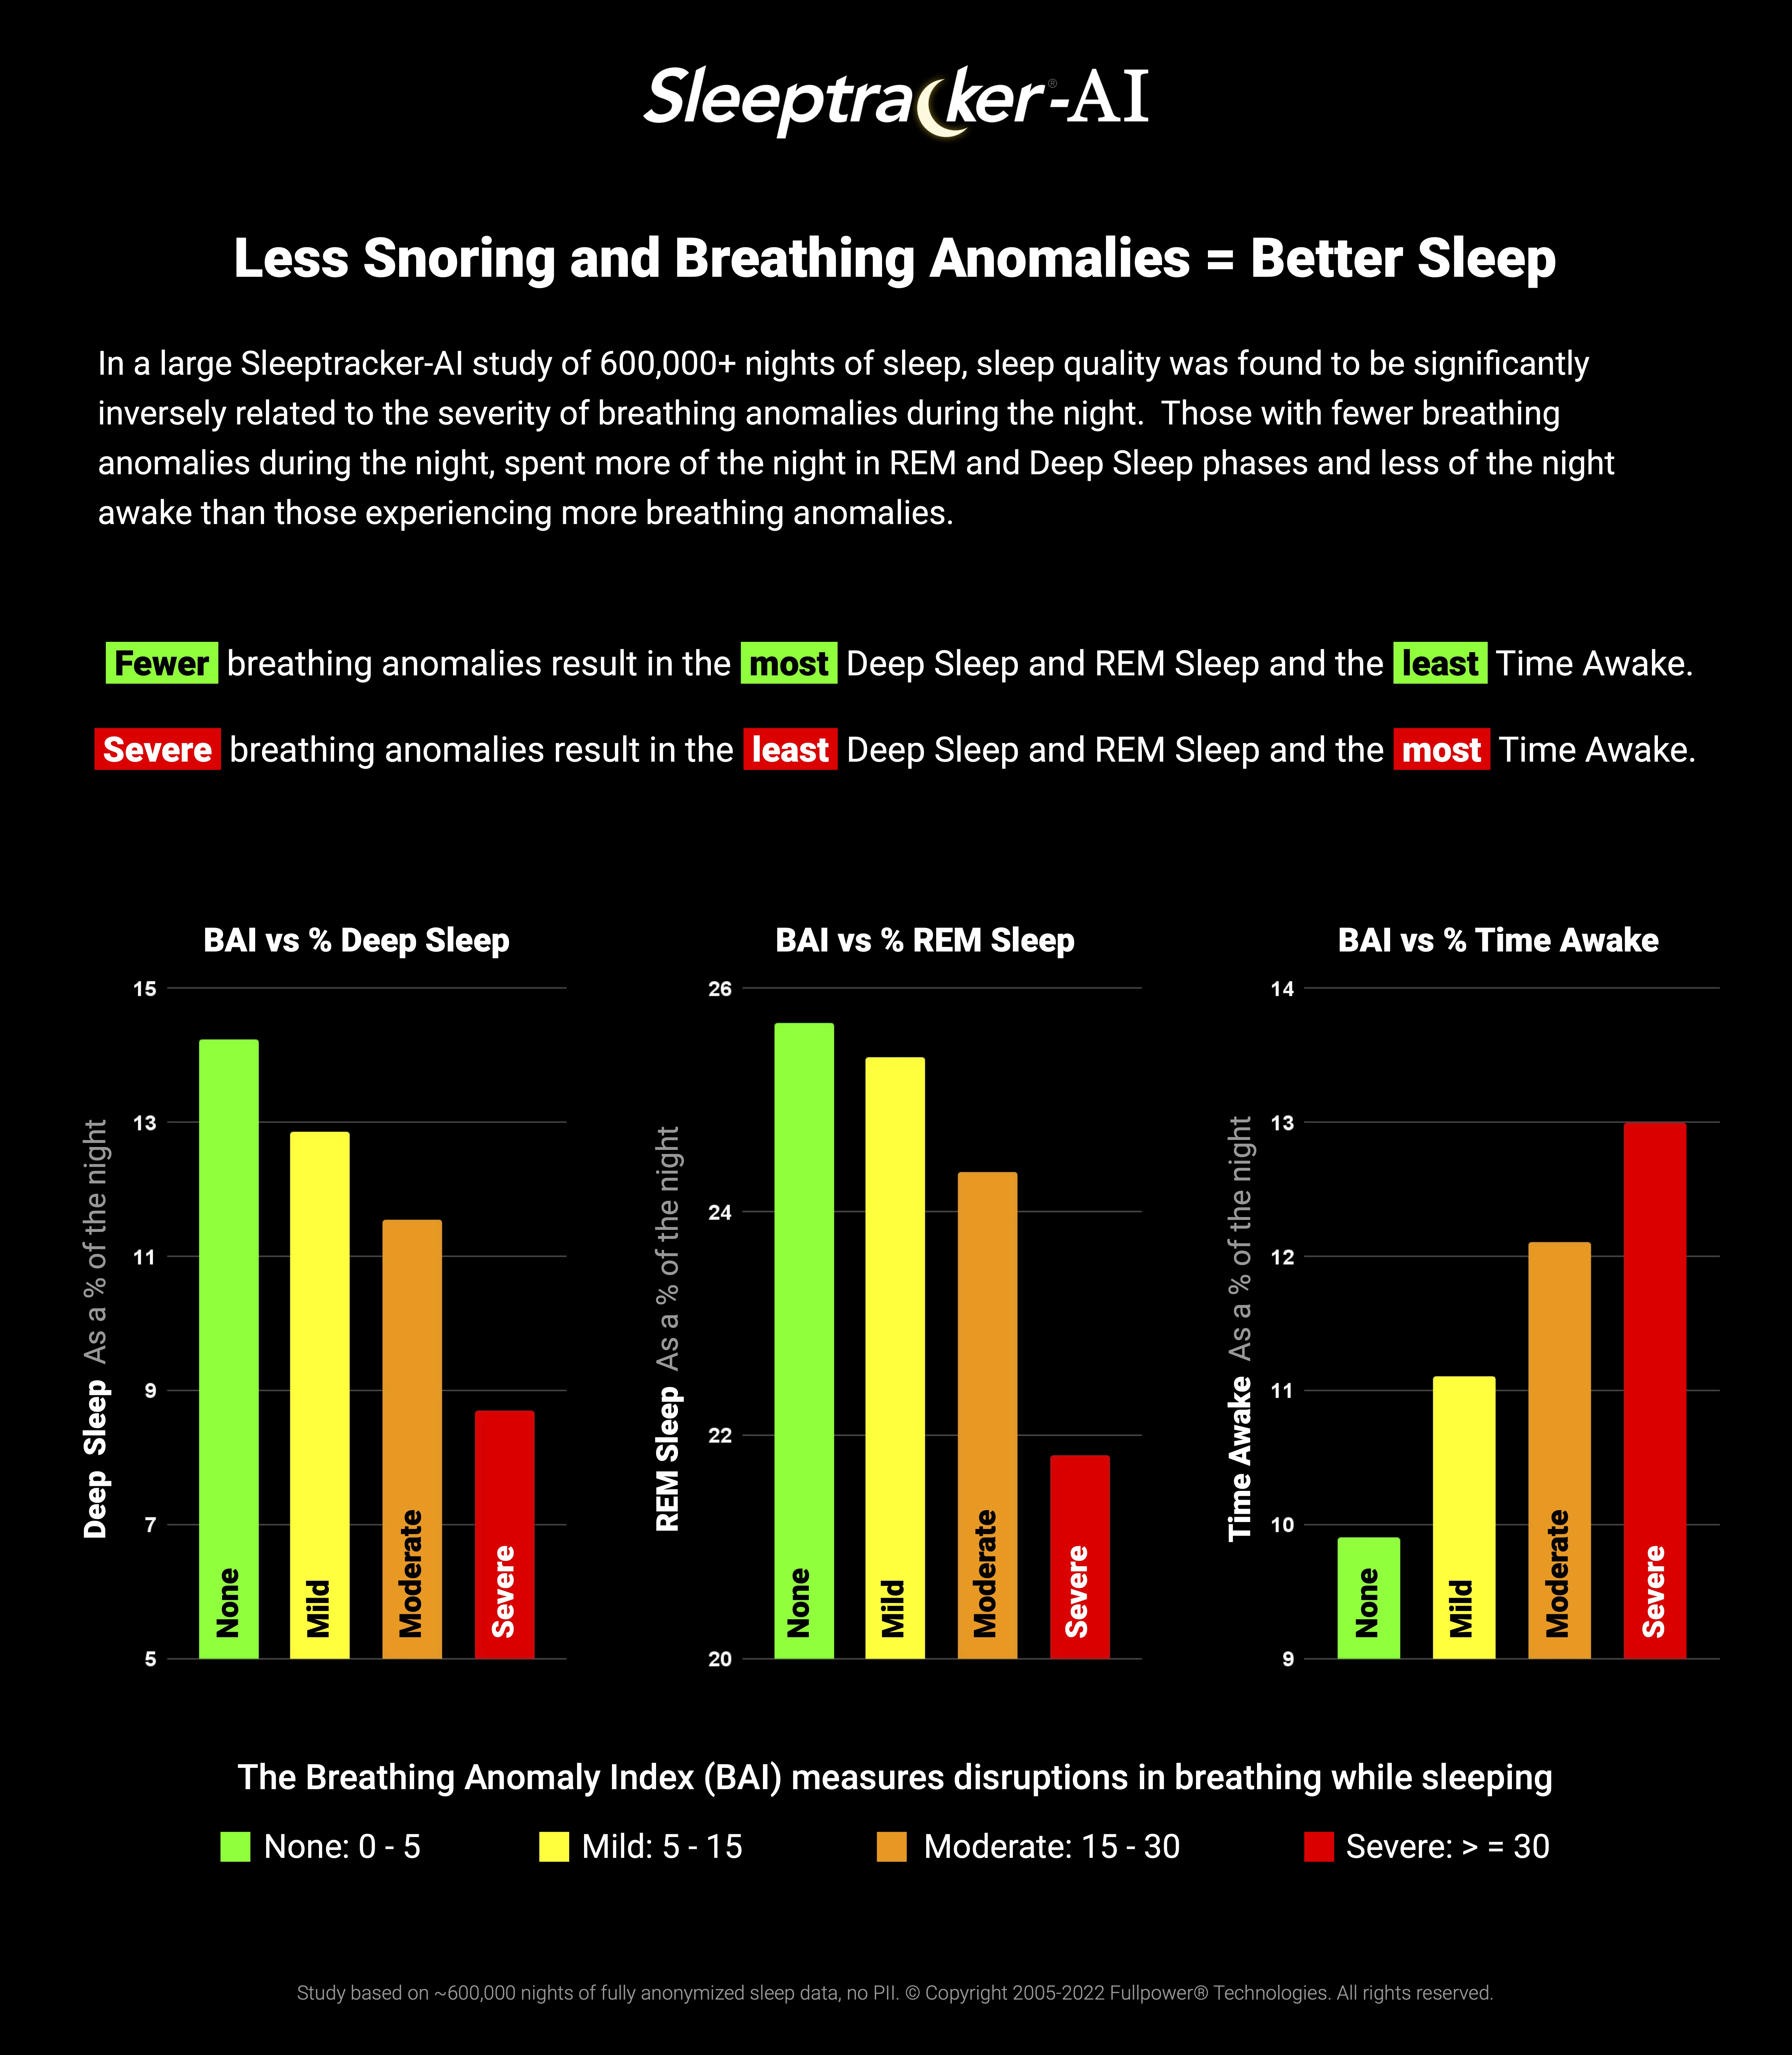 Less Snoring and Breathing Anomalies = Better Sleep